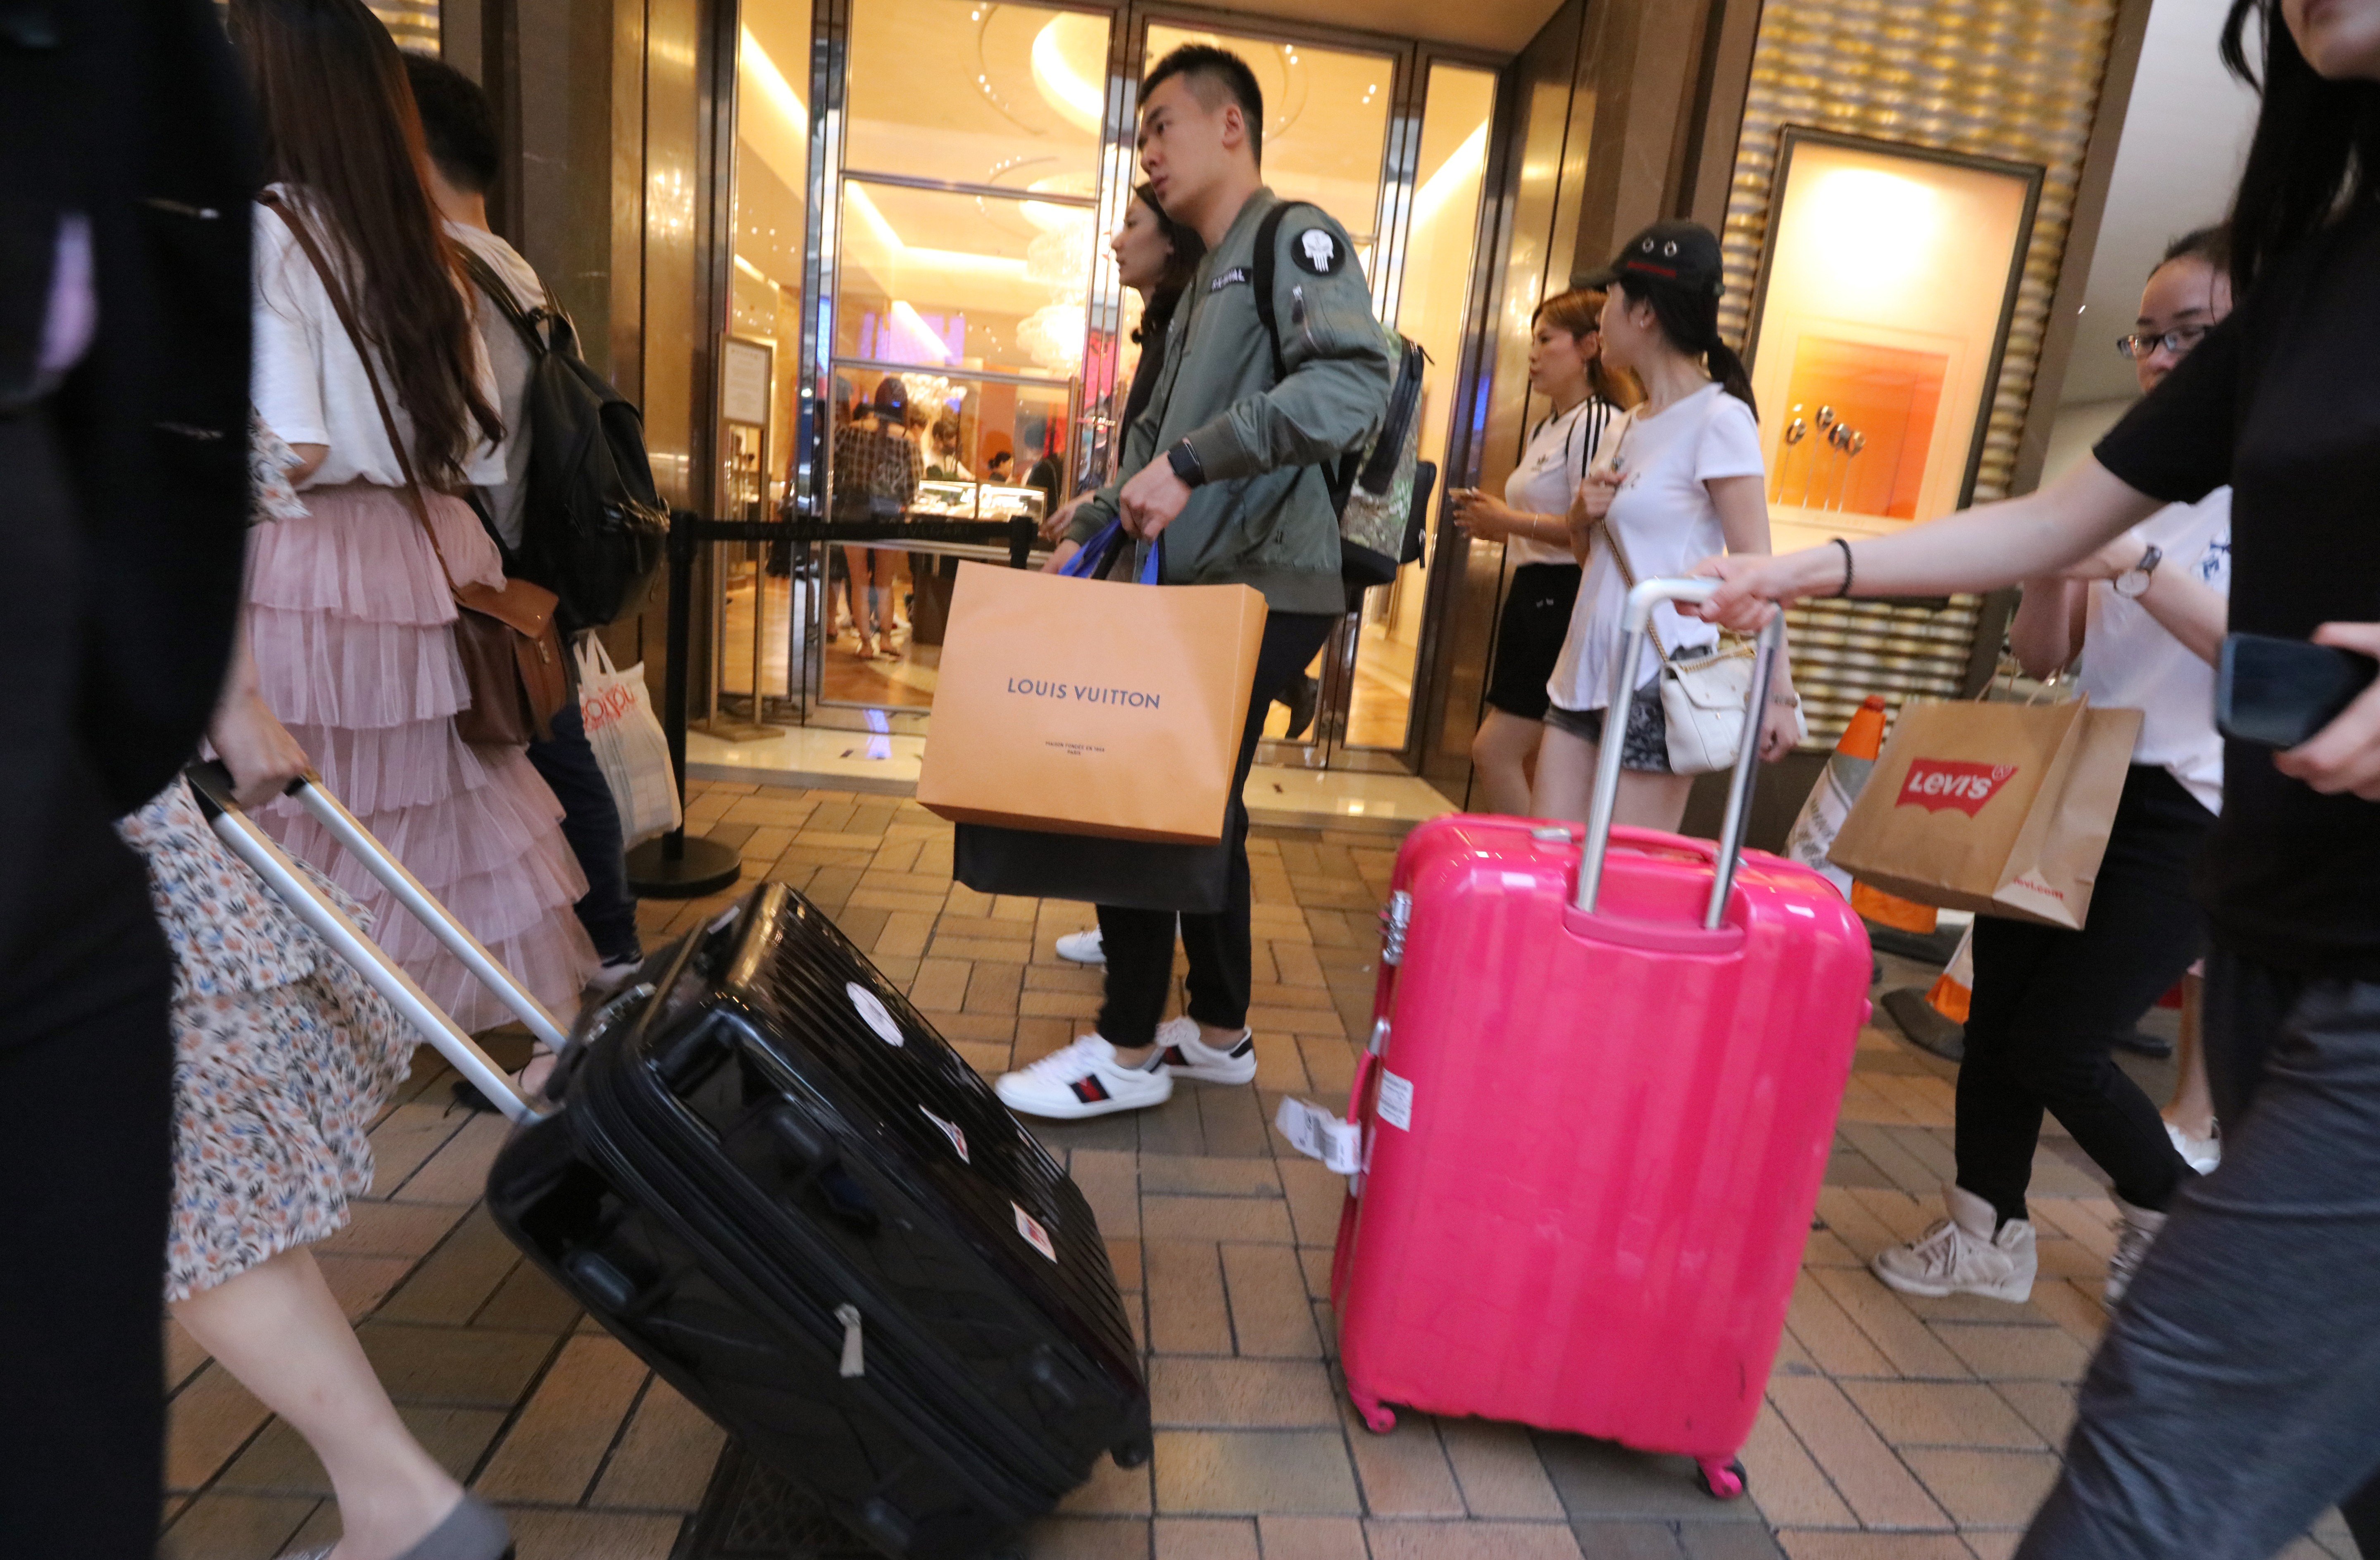 Jump in latest tourist figures year on year to nearly 5 million visitors points to recovering local economy on strength of cash-rich mainlanders